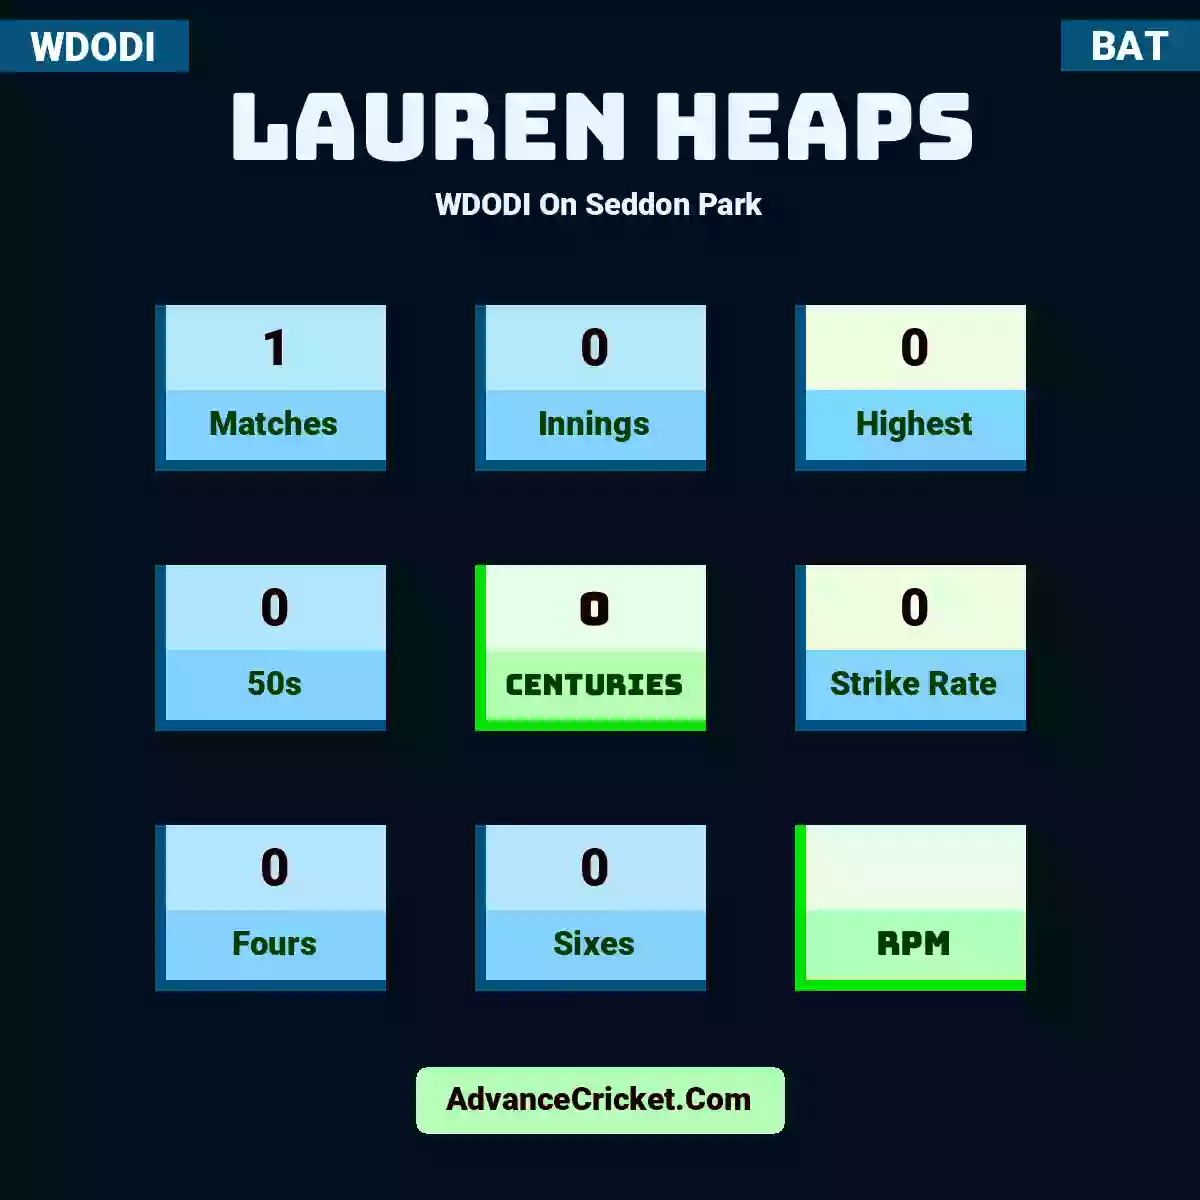 Lauren heaps WDODI  On Seddon Park, Lauren heaps played 1 matches, scored 0 runs as highest, 0 half-centuries, and 0 centuries, with a strike rate of 0. L.heaps hit 0 fours and 0 sixes.